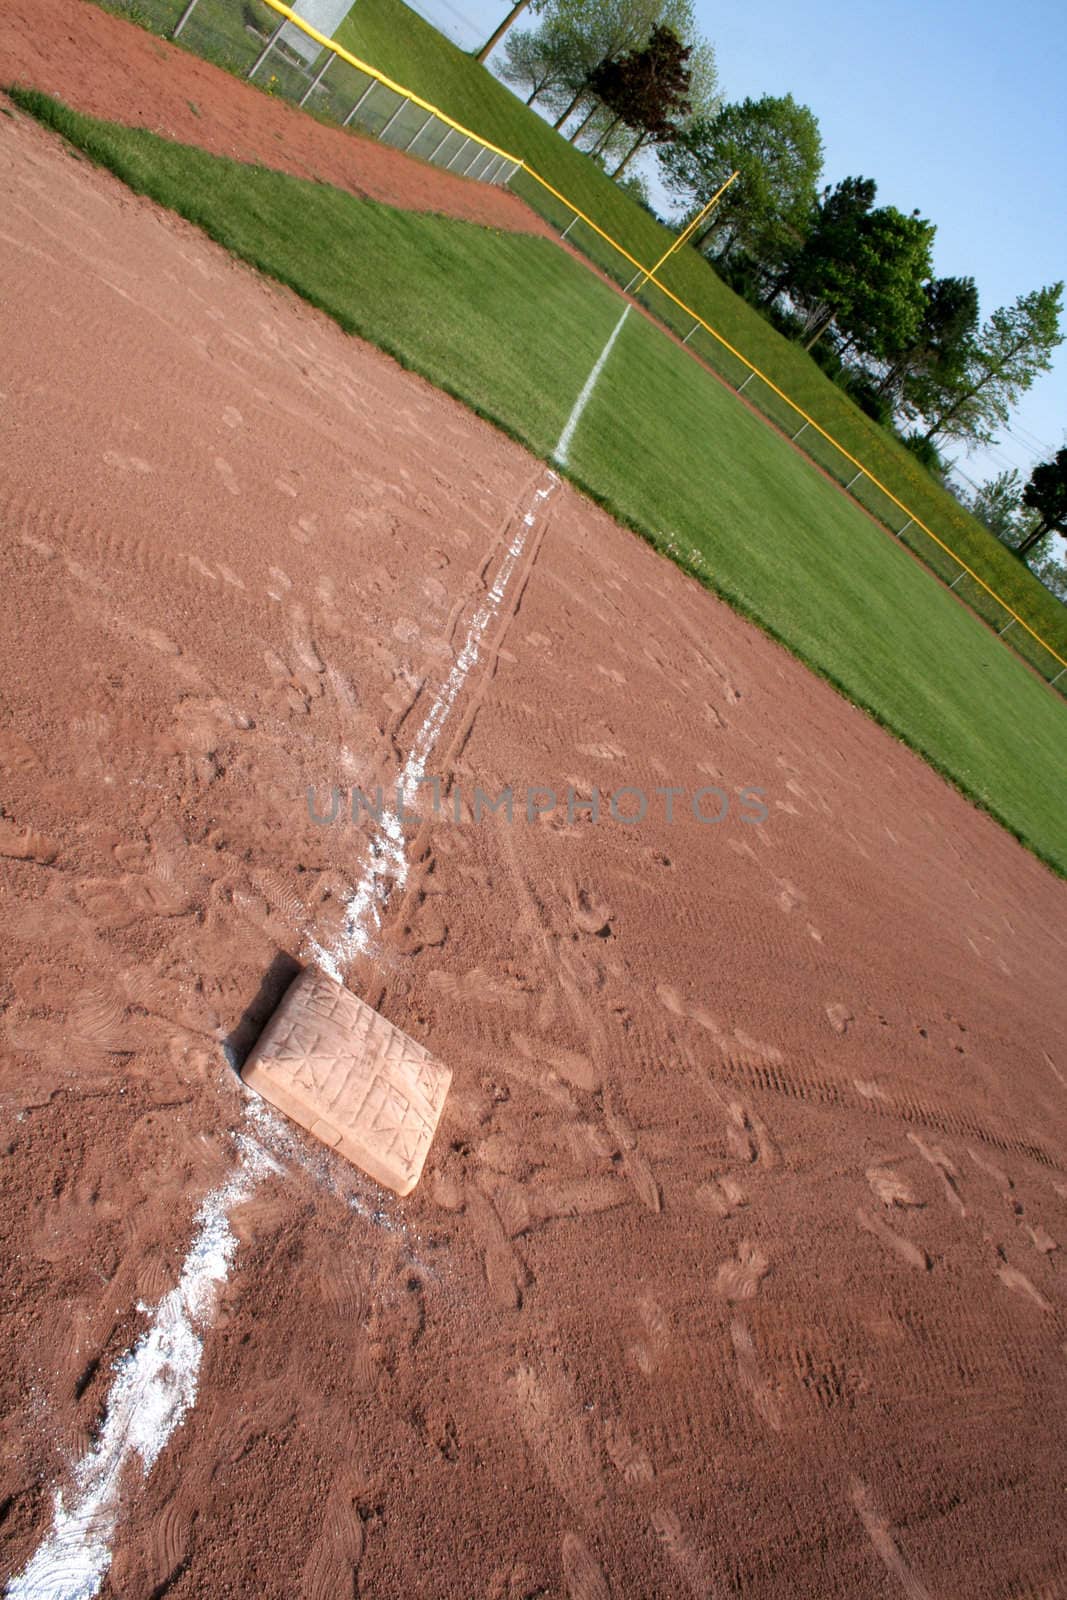 An interesting perspective of a shot down the left field line.